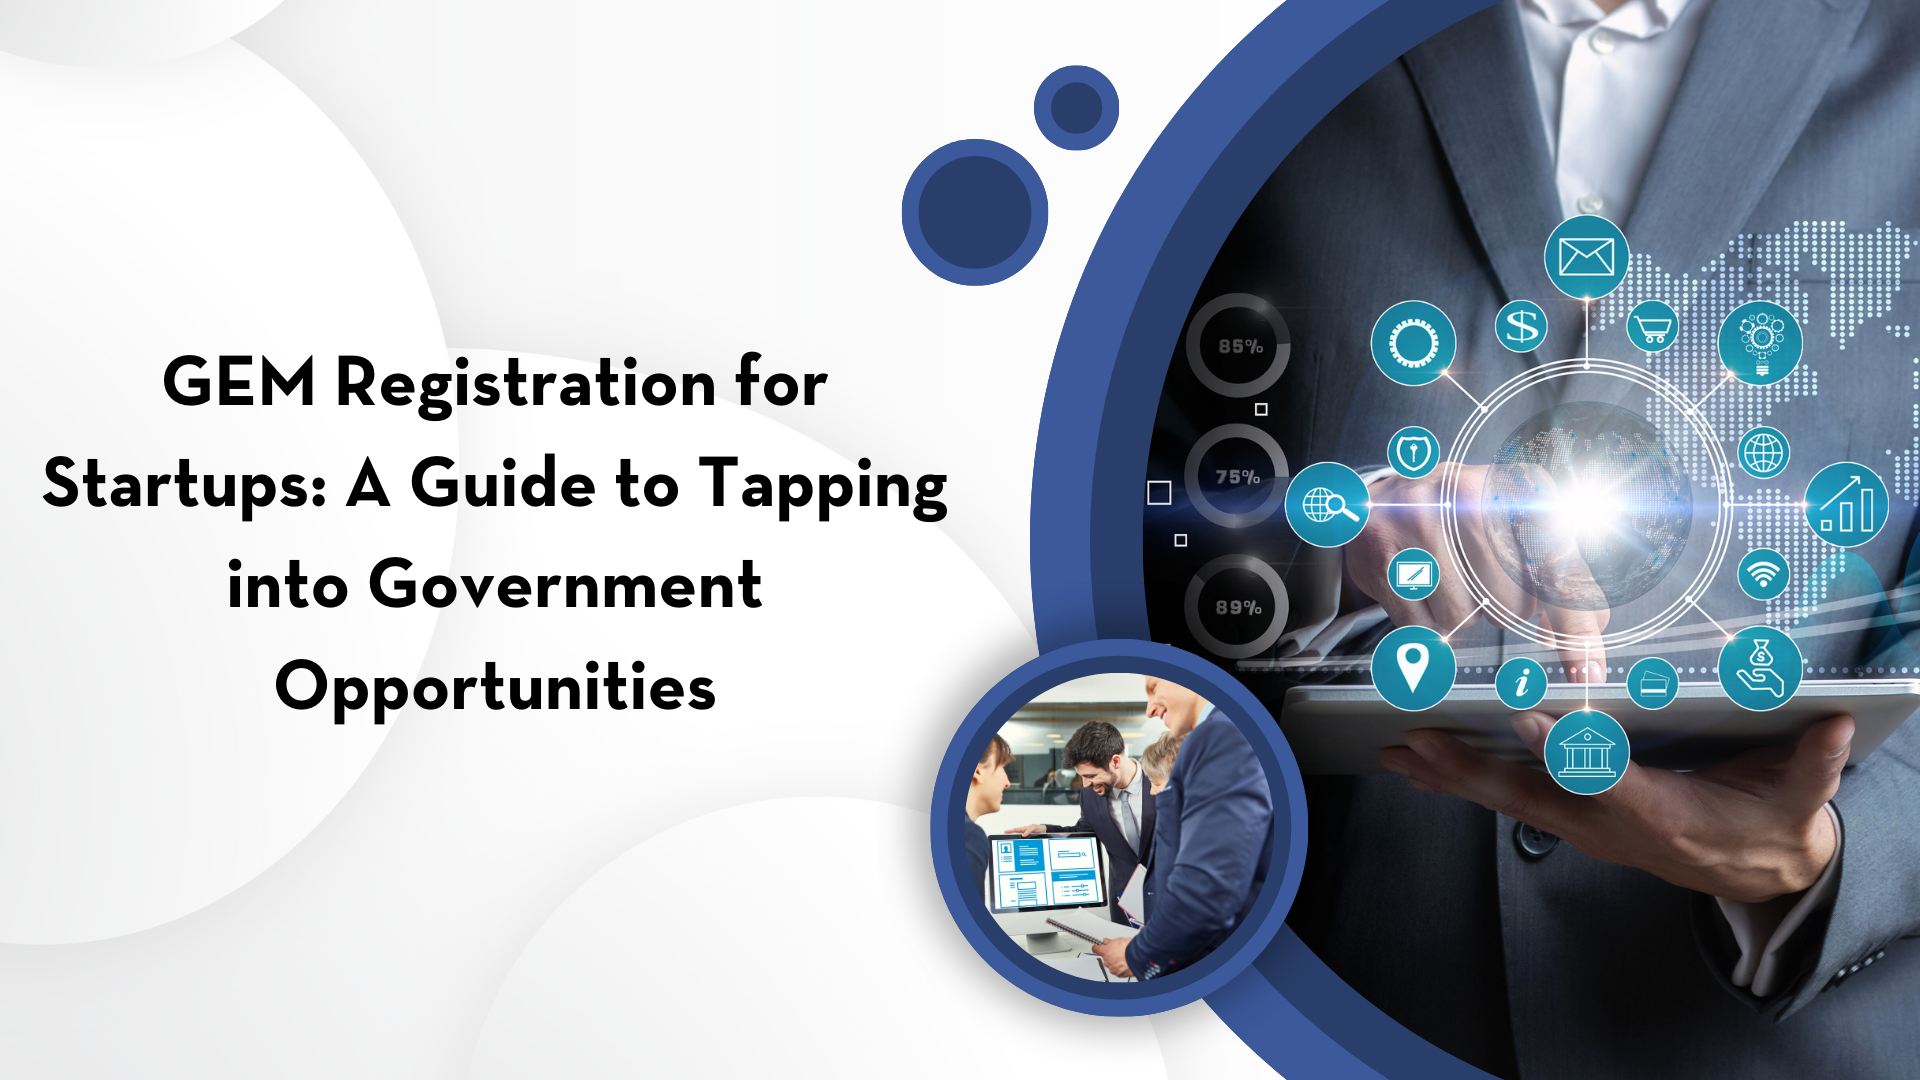 GEM Registration for Startups: A Guide to Tapping into Government Opportunities